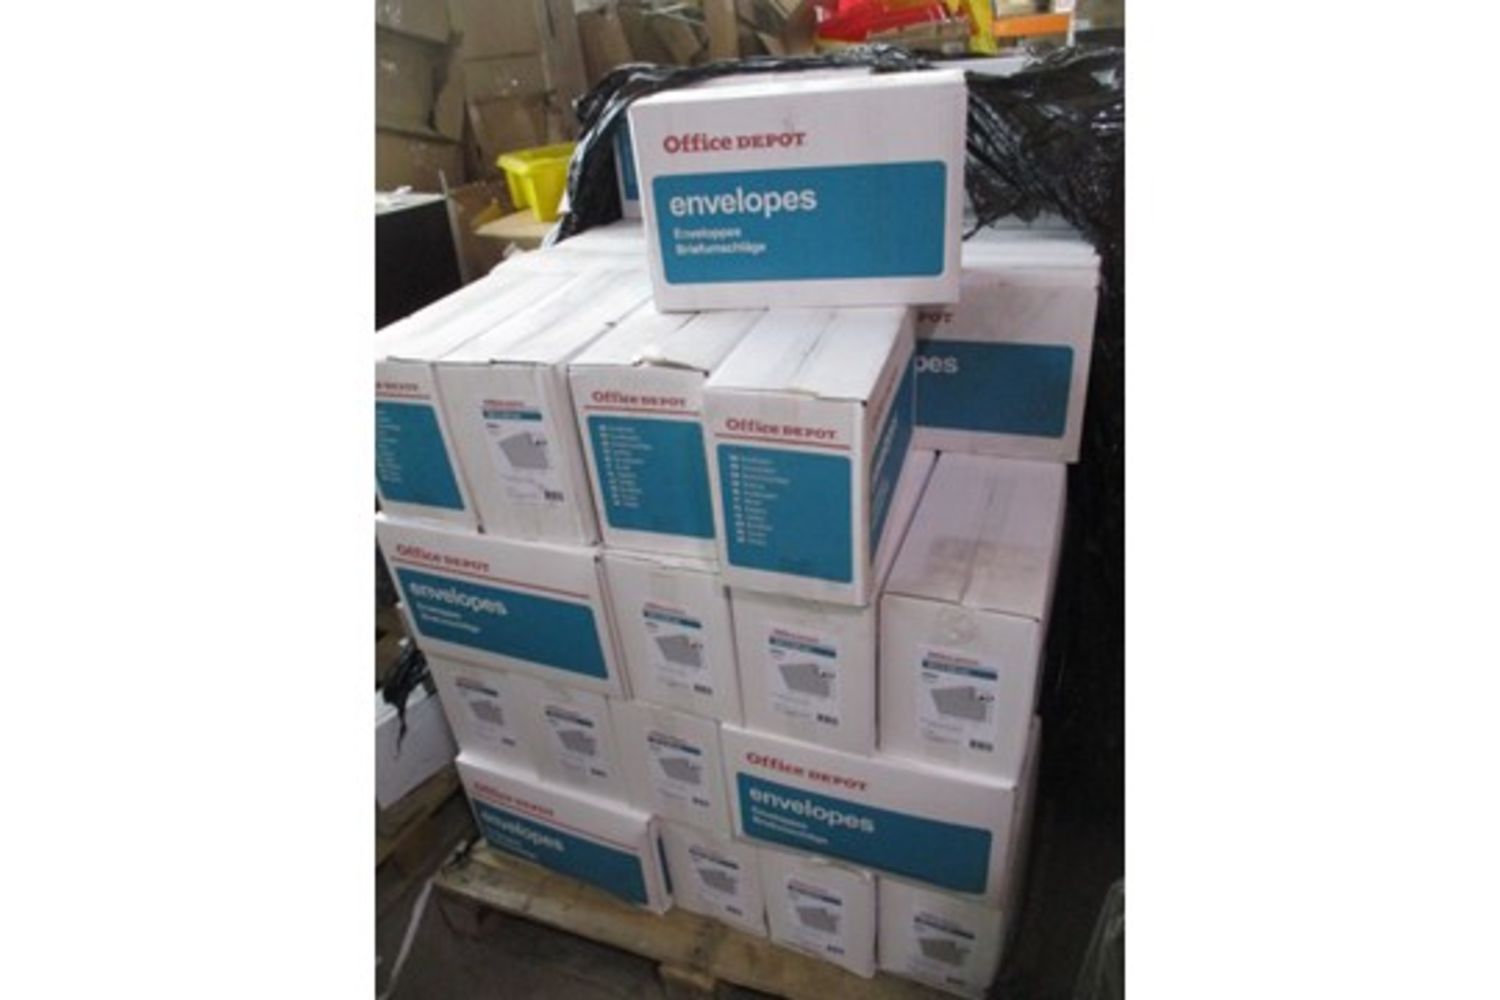 Offsite SIngles, Bulk and Trade Lots of Russell Hobbs, Gardecco, Electric Heaters, Crayola and More